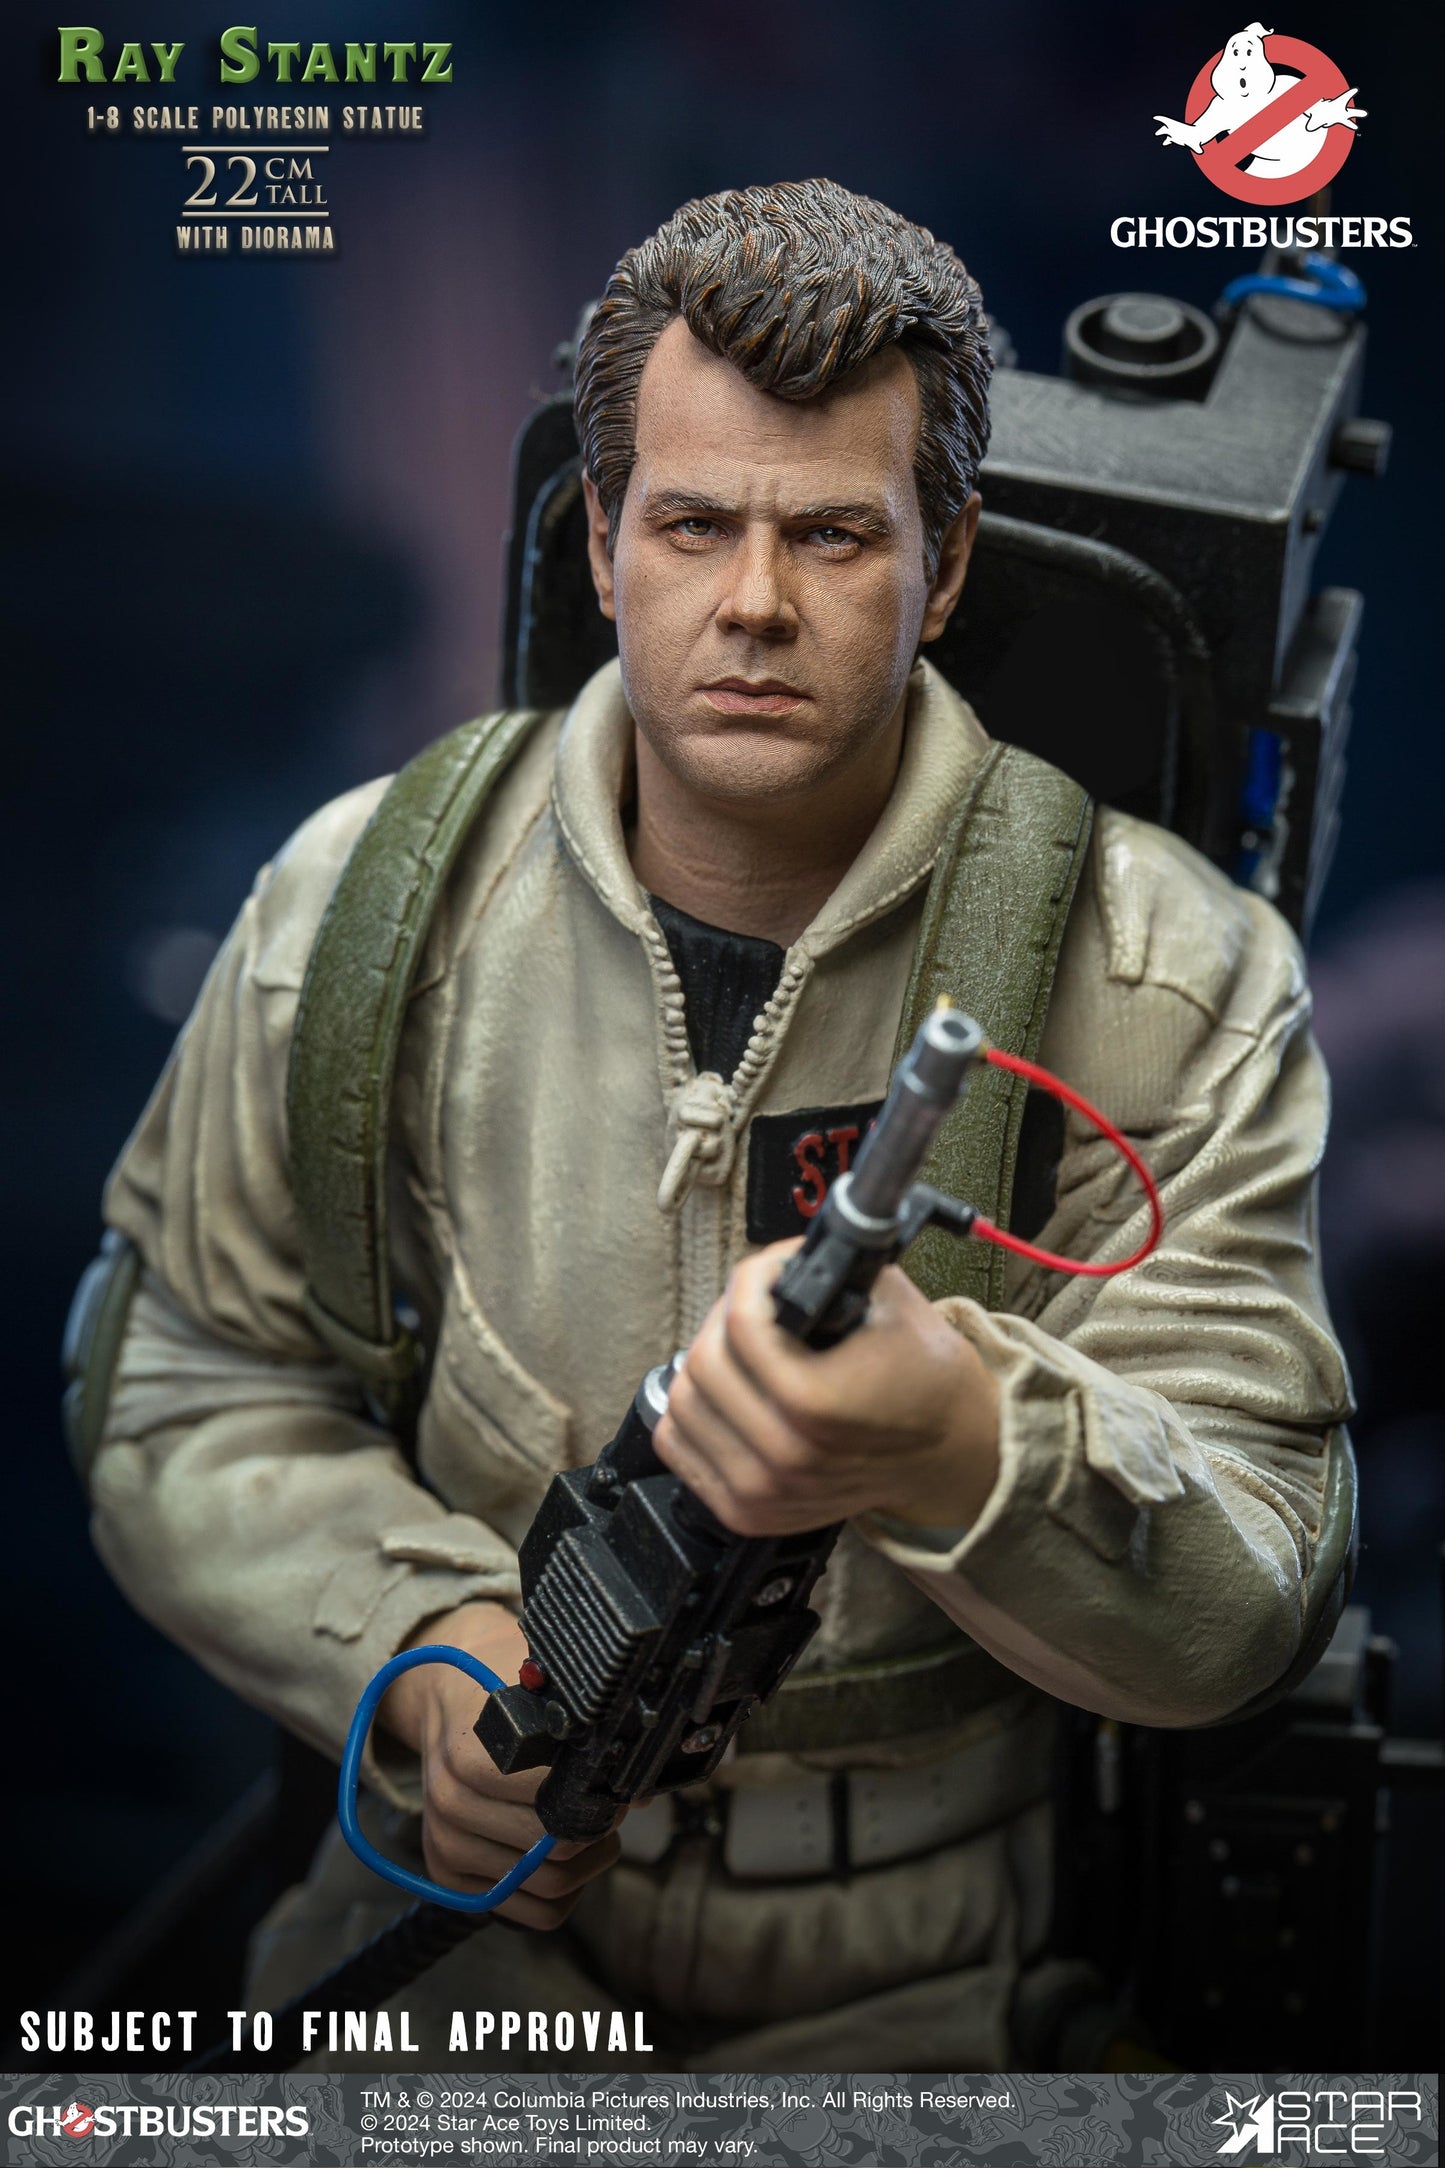 GHOSTBUSTERS RAY STANTZ 1/8 SCALE POLYRESIN STATUE